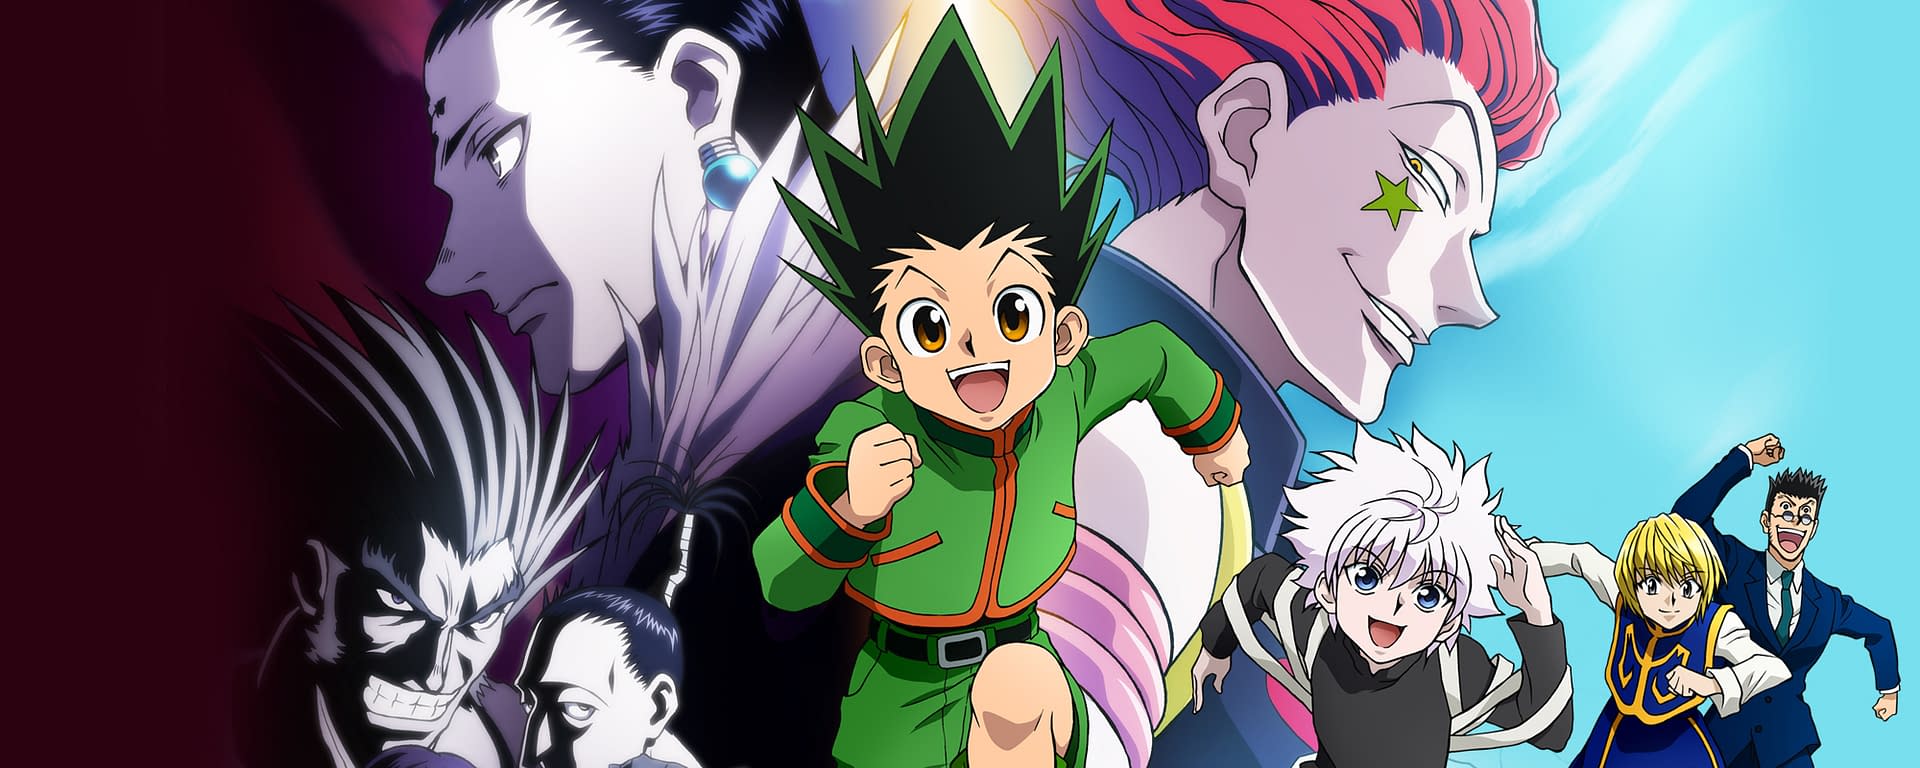 Hunter x Hunter :: gif :: anime :: fight :: more in comments